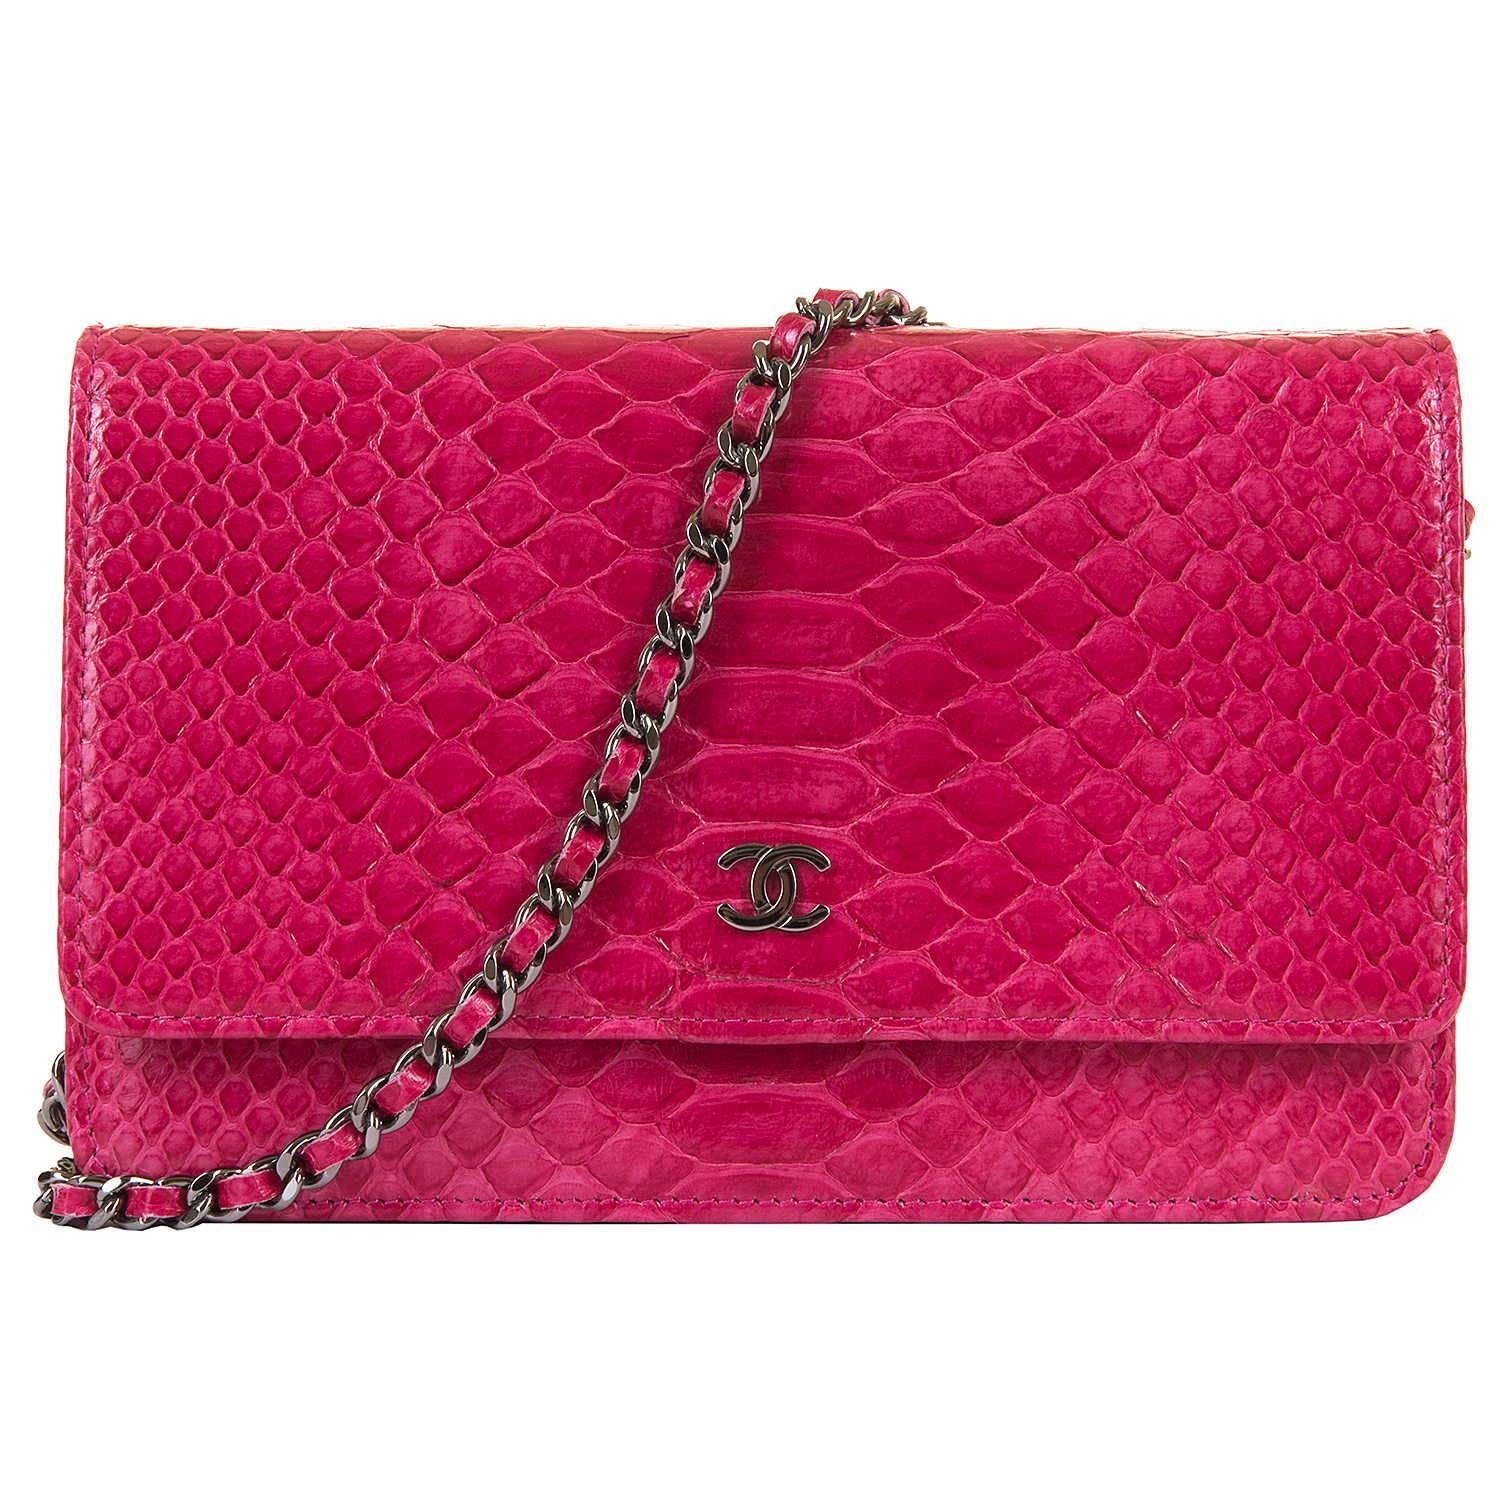 So, so Rare an absolutely stunning Chanel Fushia Pink Python skin Wallet on Chain/Bag with Silver Palladium Hardware. In pristine, store-fresh condition, throughout, the bag comes with it's original box, including packaging, ribbon etc. together